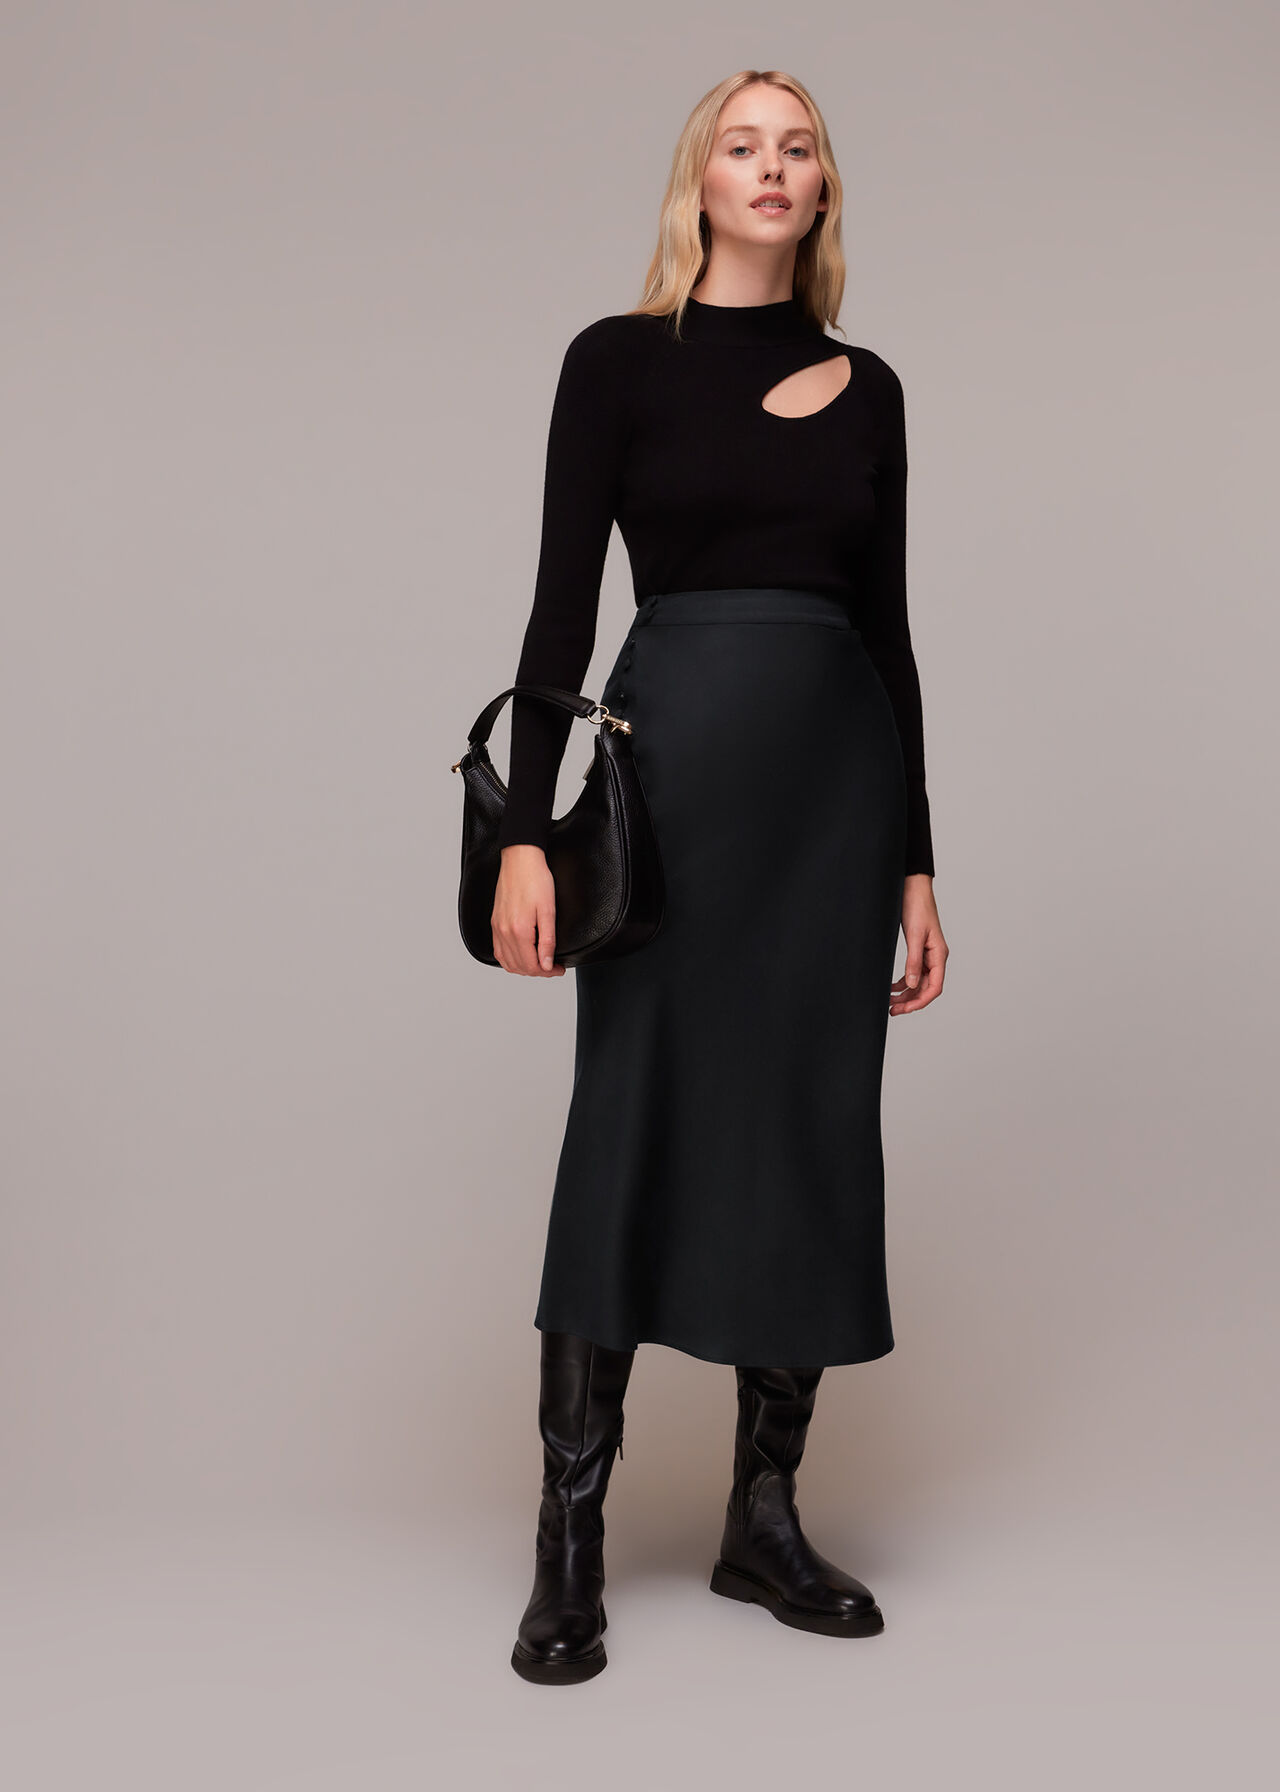 8 Effortless Black Skirt Outfits to Try this Season | Who What Wear UK